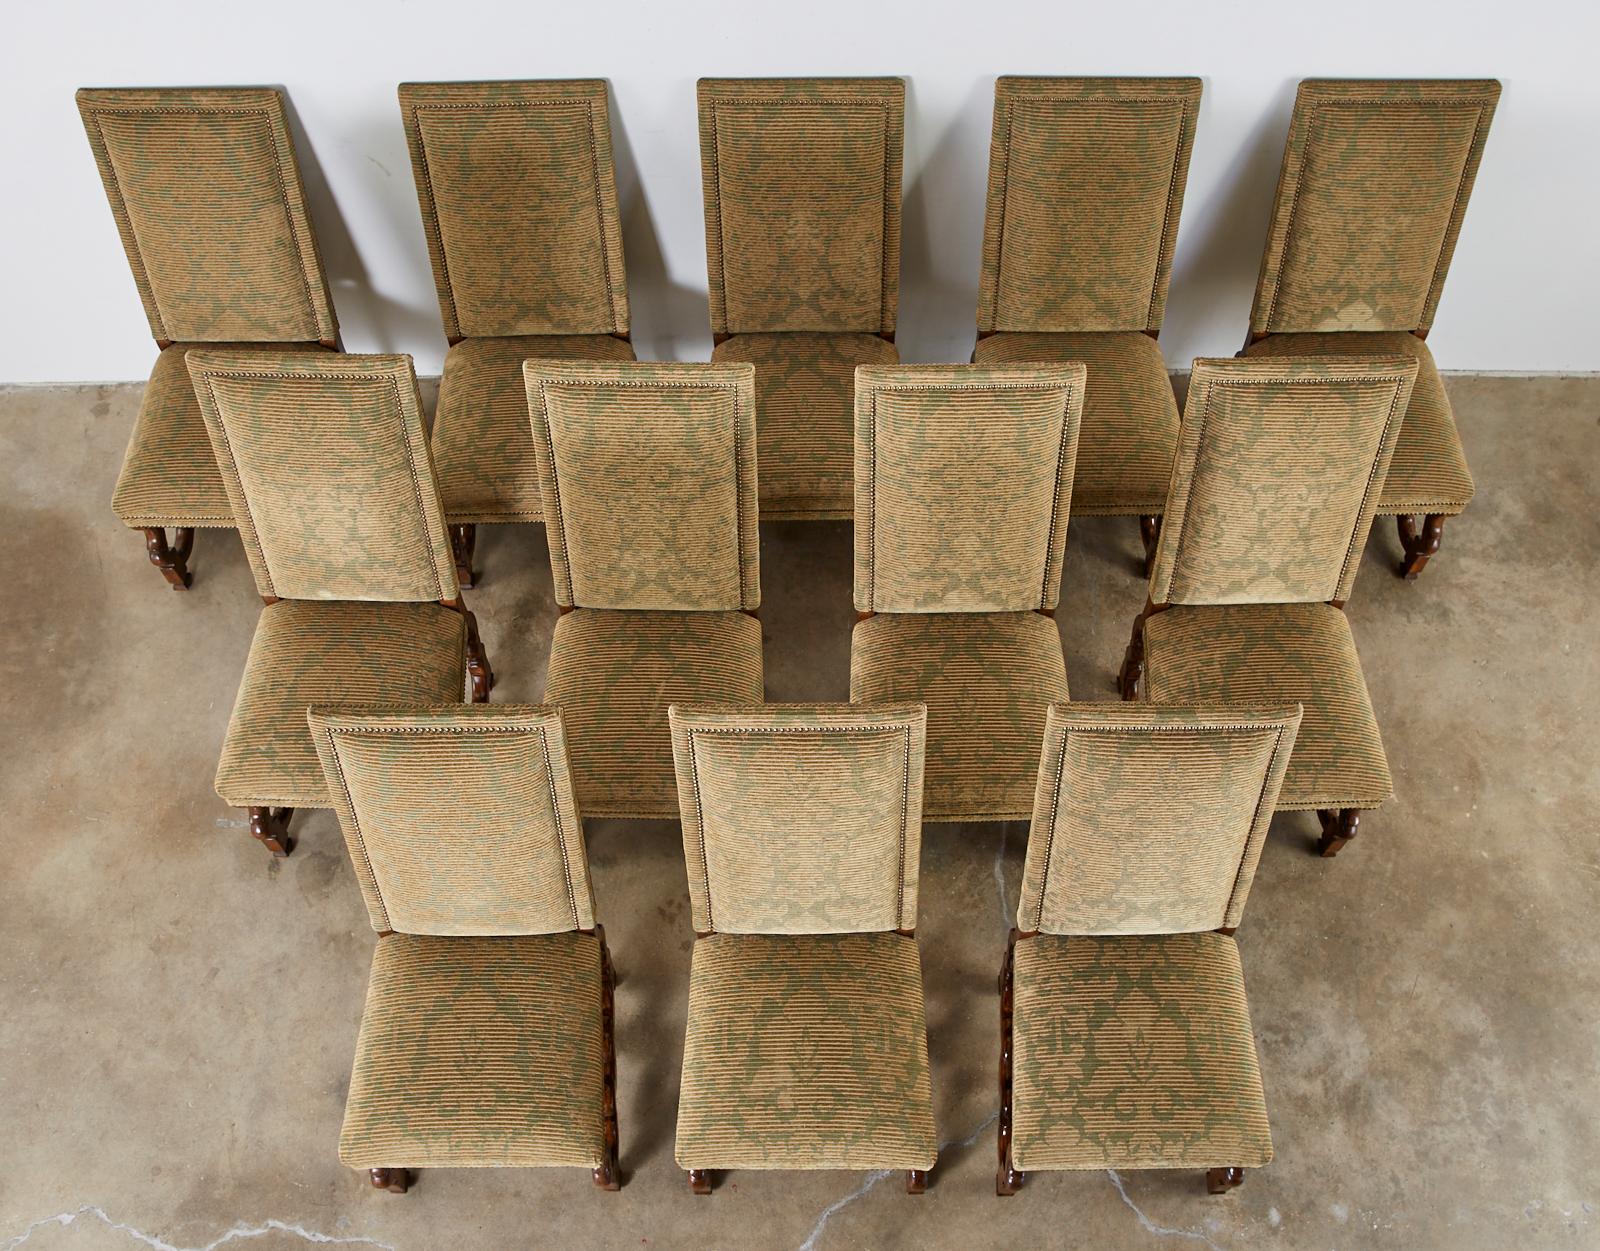 Bespoke set of twelve upholstered dining chairs made in the French Louis XIV taste also known as Os de Mouton chairs. The matching chairs feature a textured fabric in moss green and camel hair color with a subtle foliate design. The fabric is